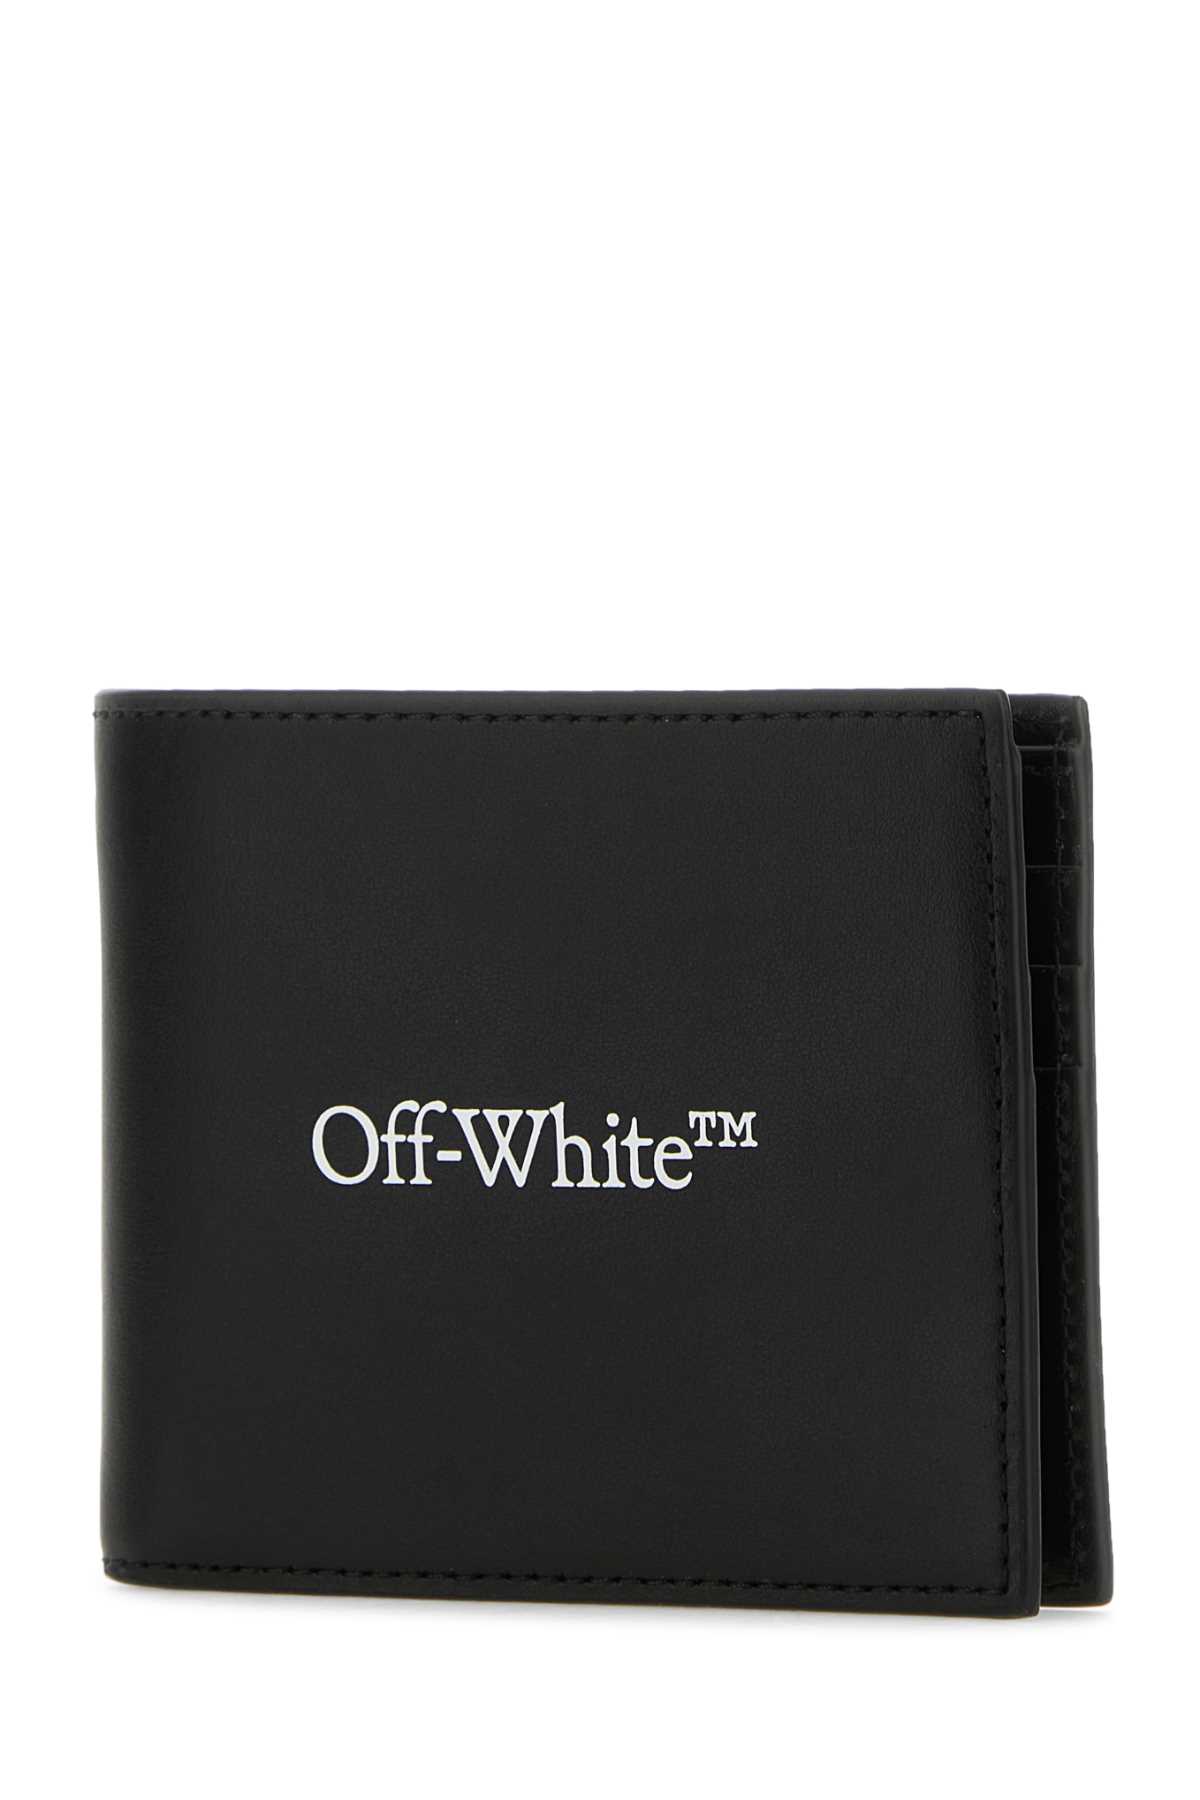 OFF-WHITE BLACK LEATHER WALLET